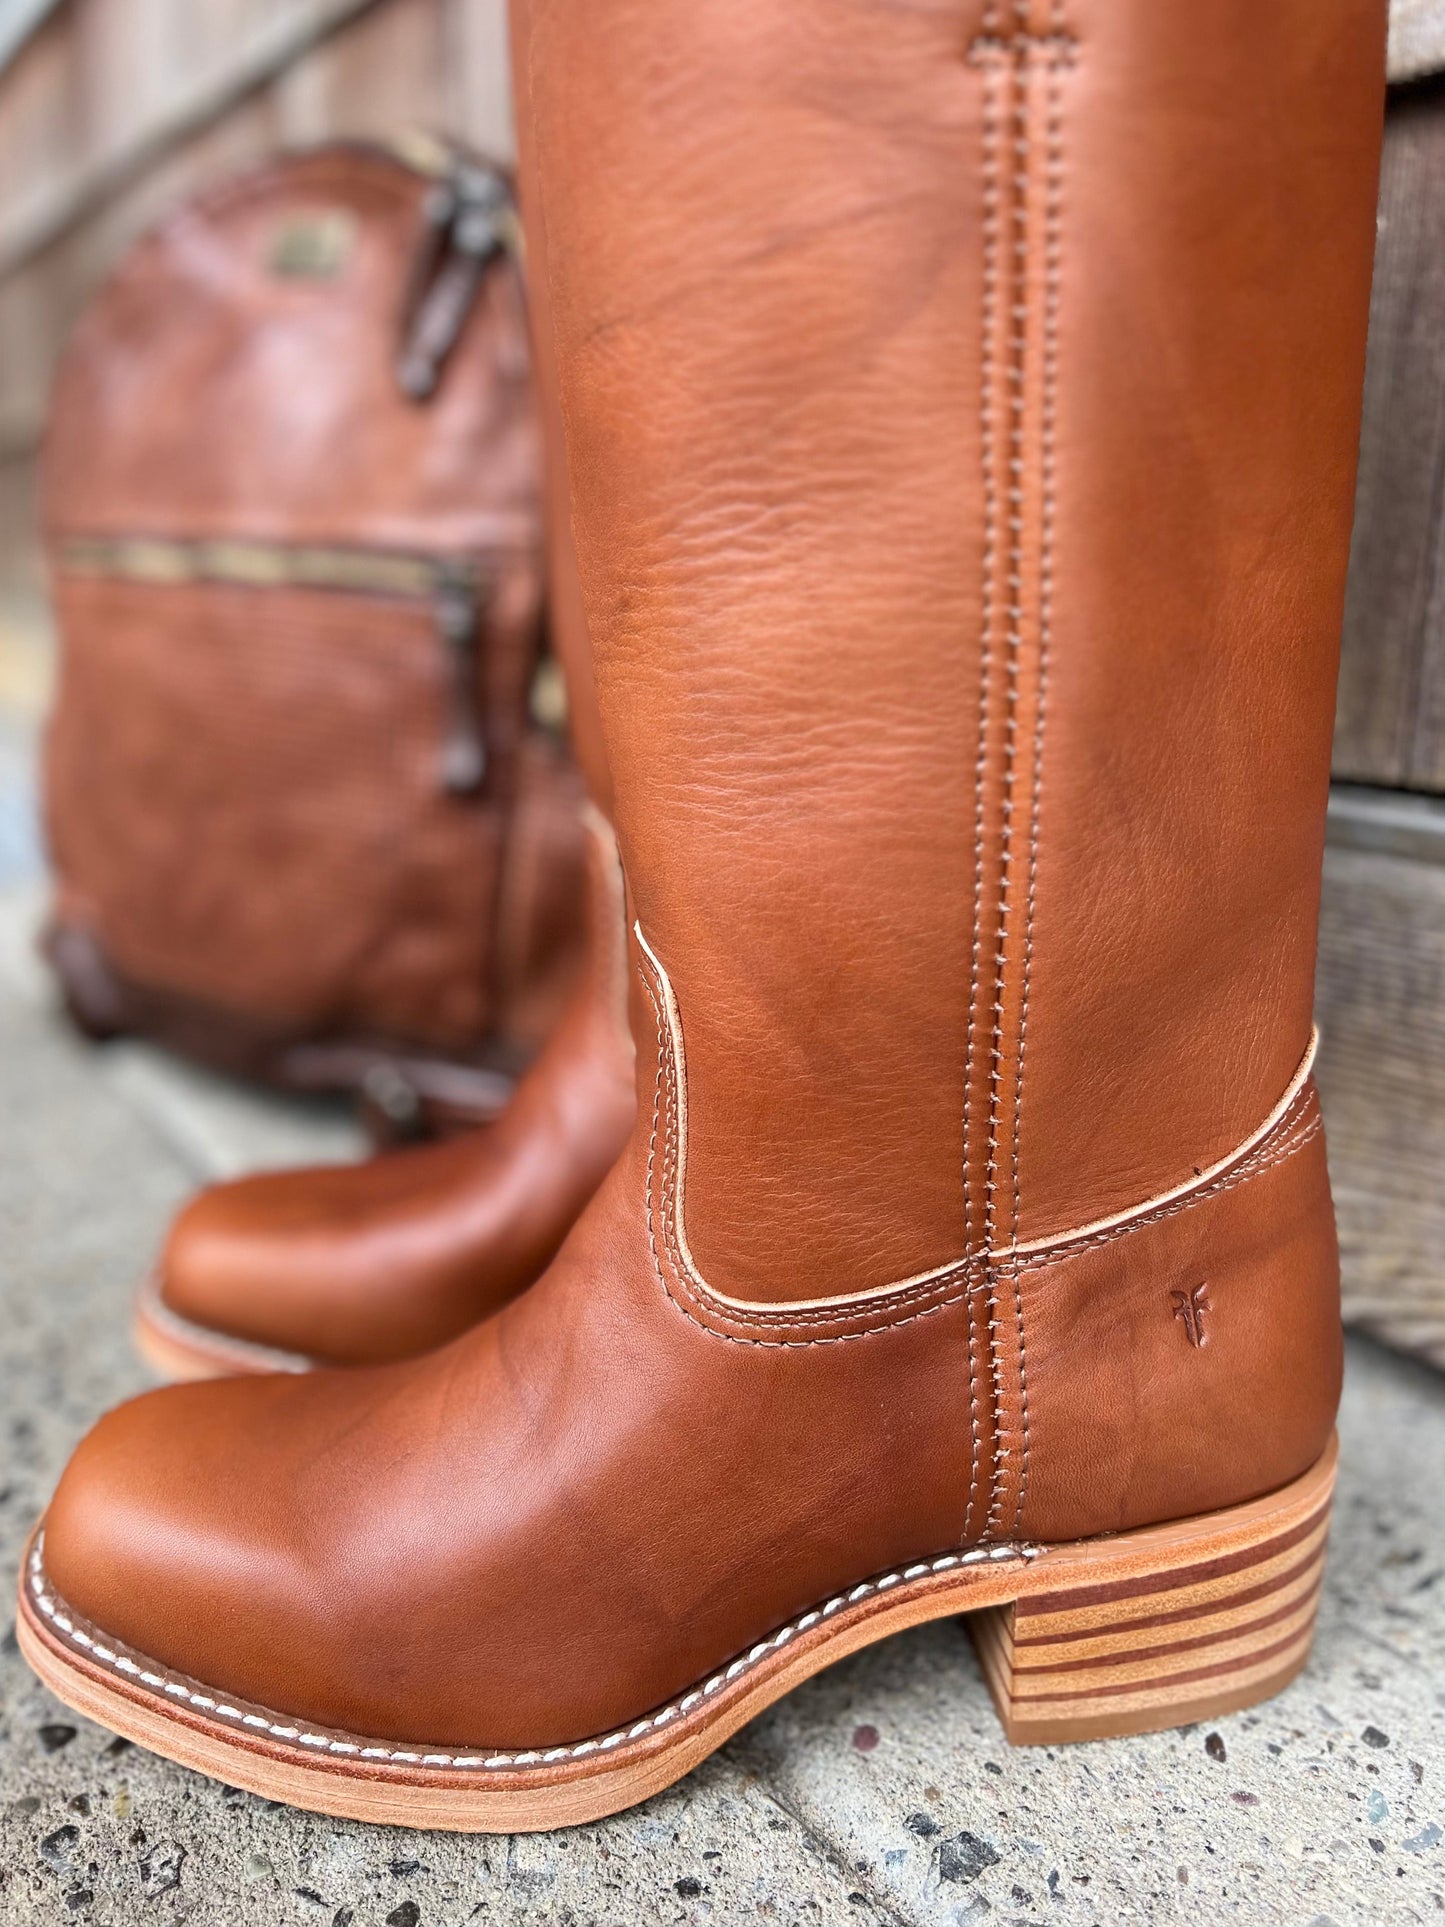 Frye Campus Leather Boot - Saddle display side 